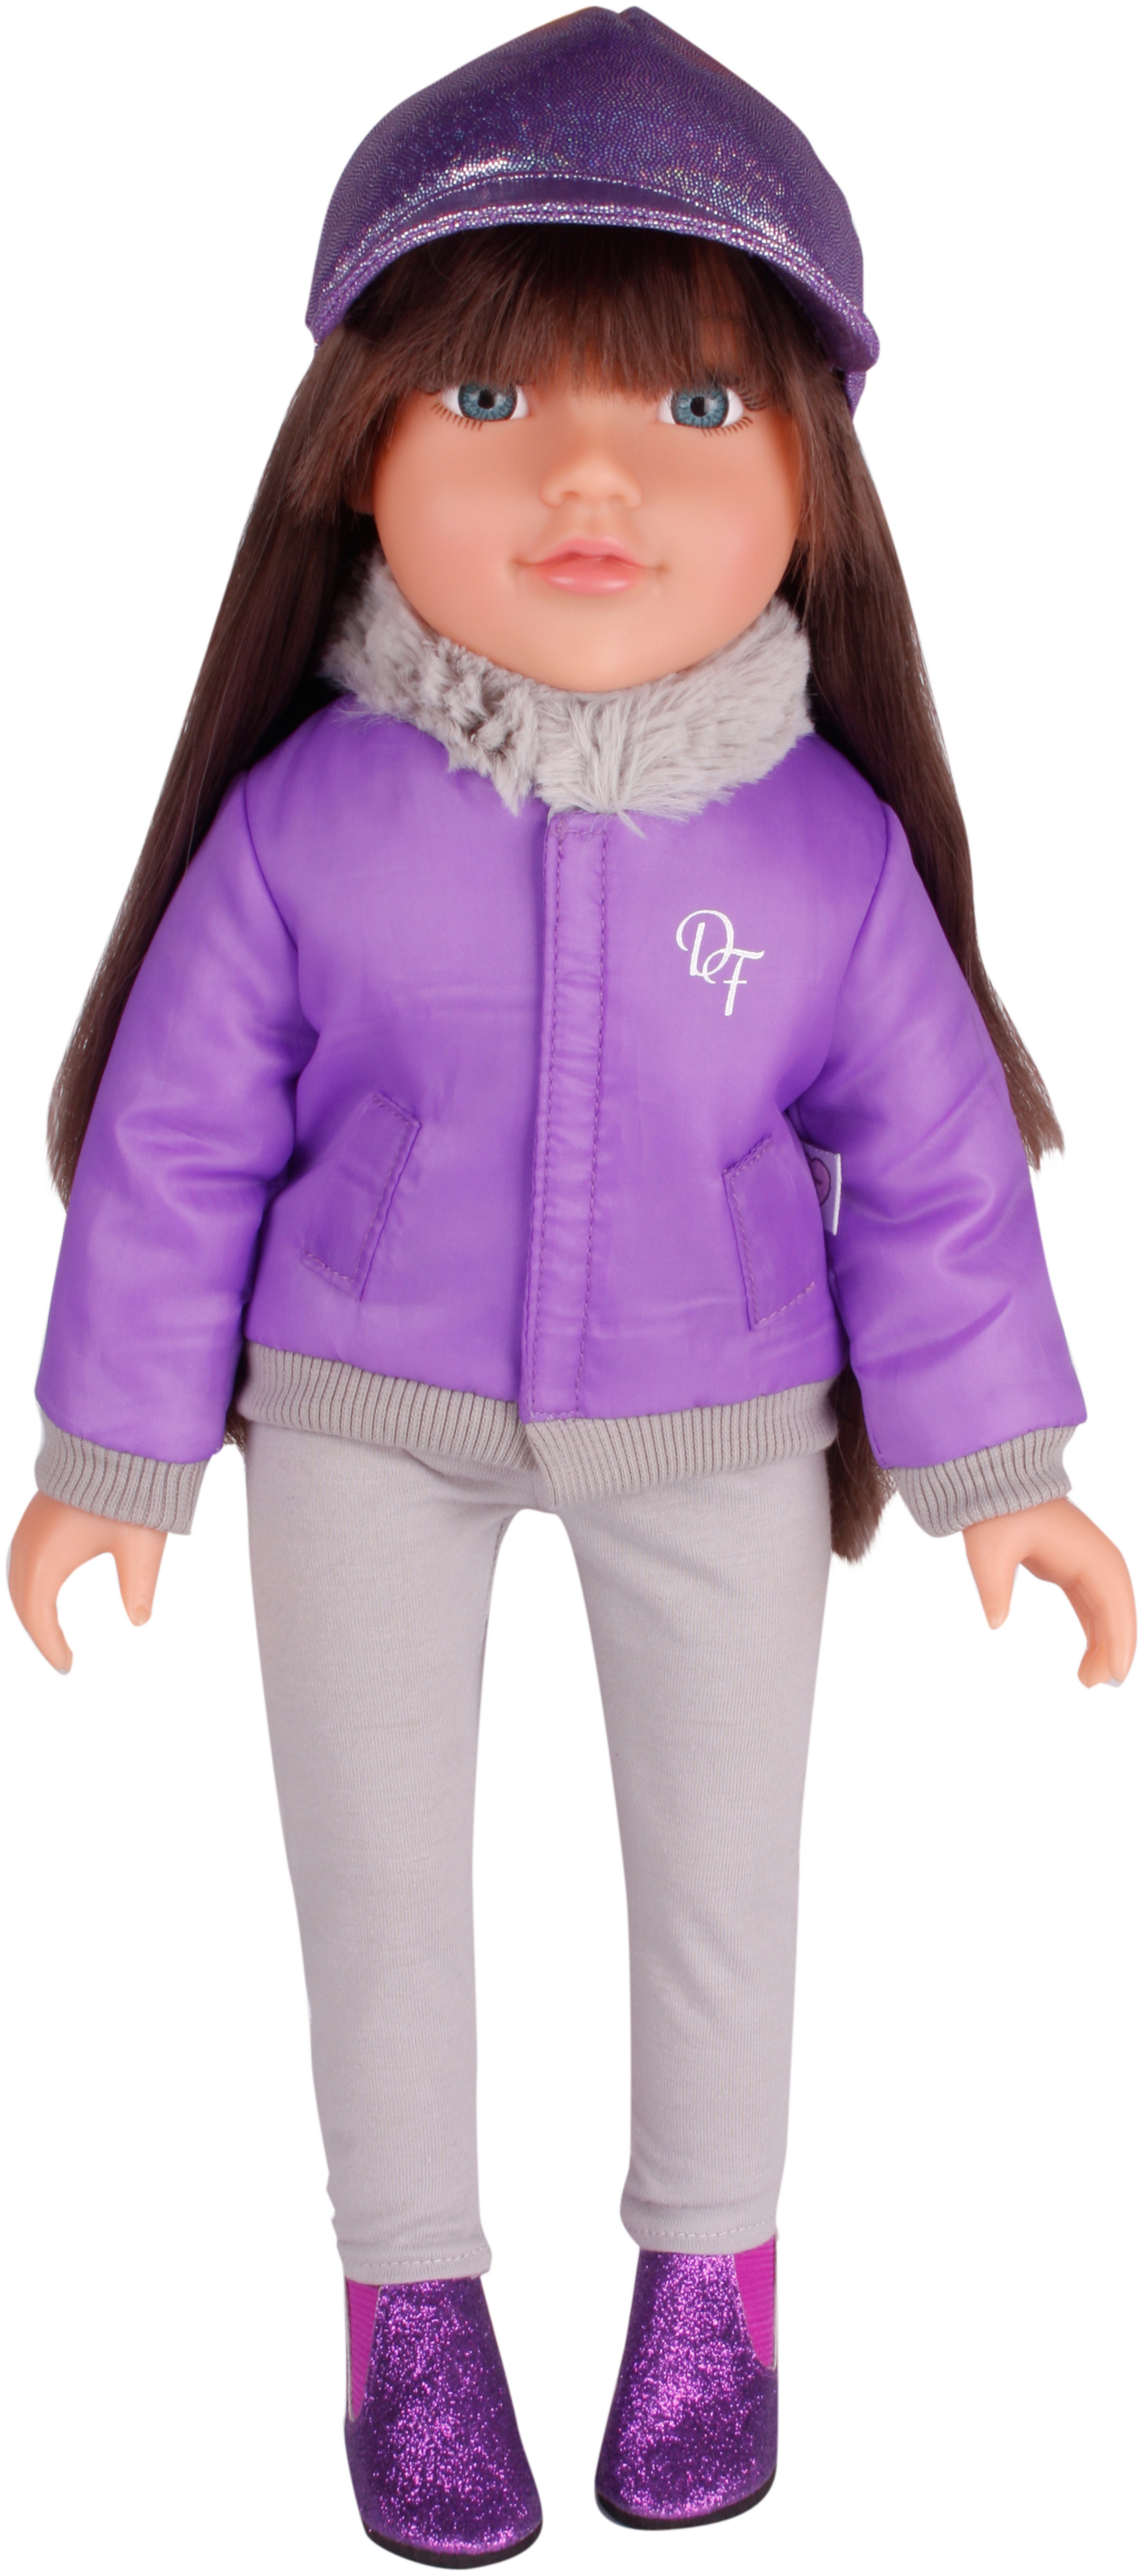 Chad Valley DesignaFriend Lilac Coat Outfit.